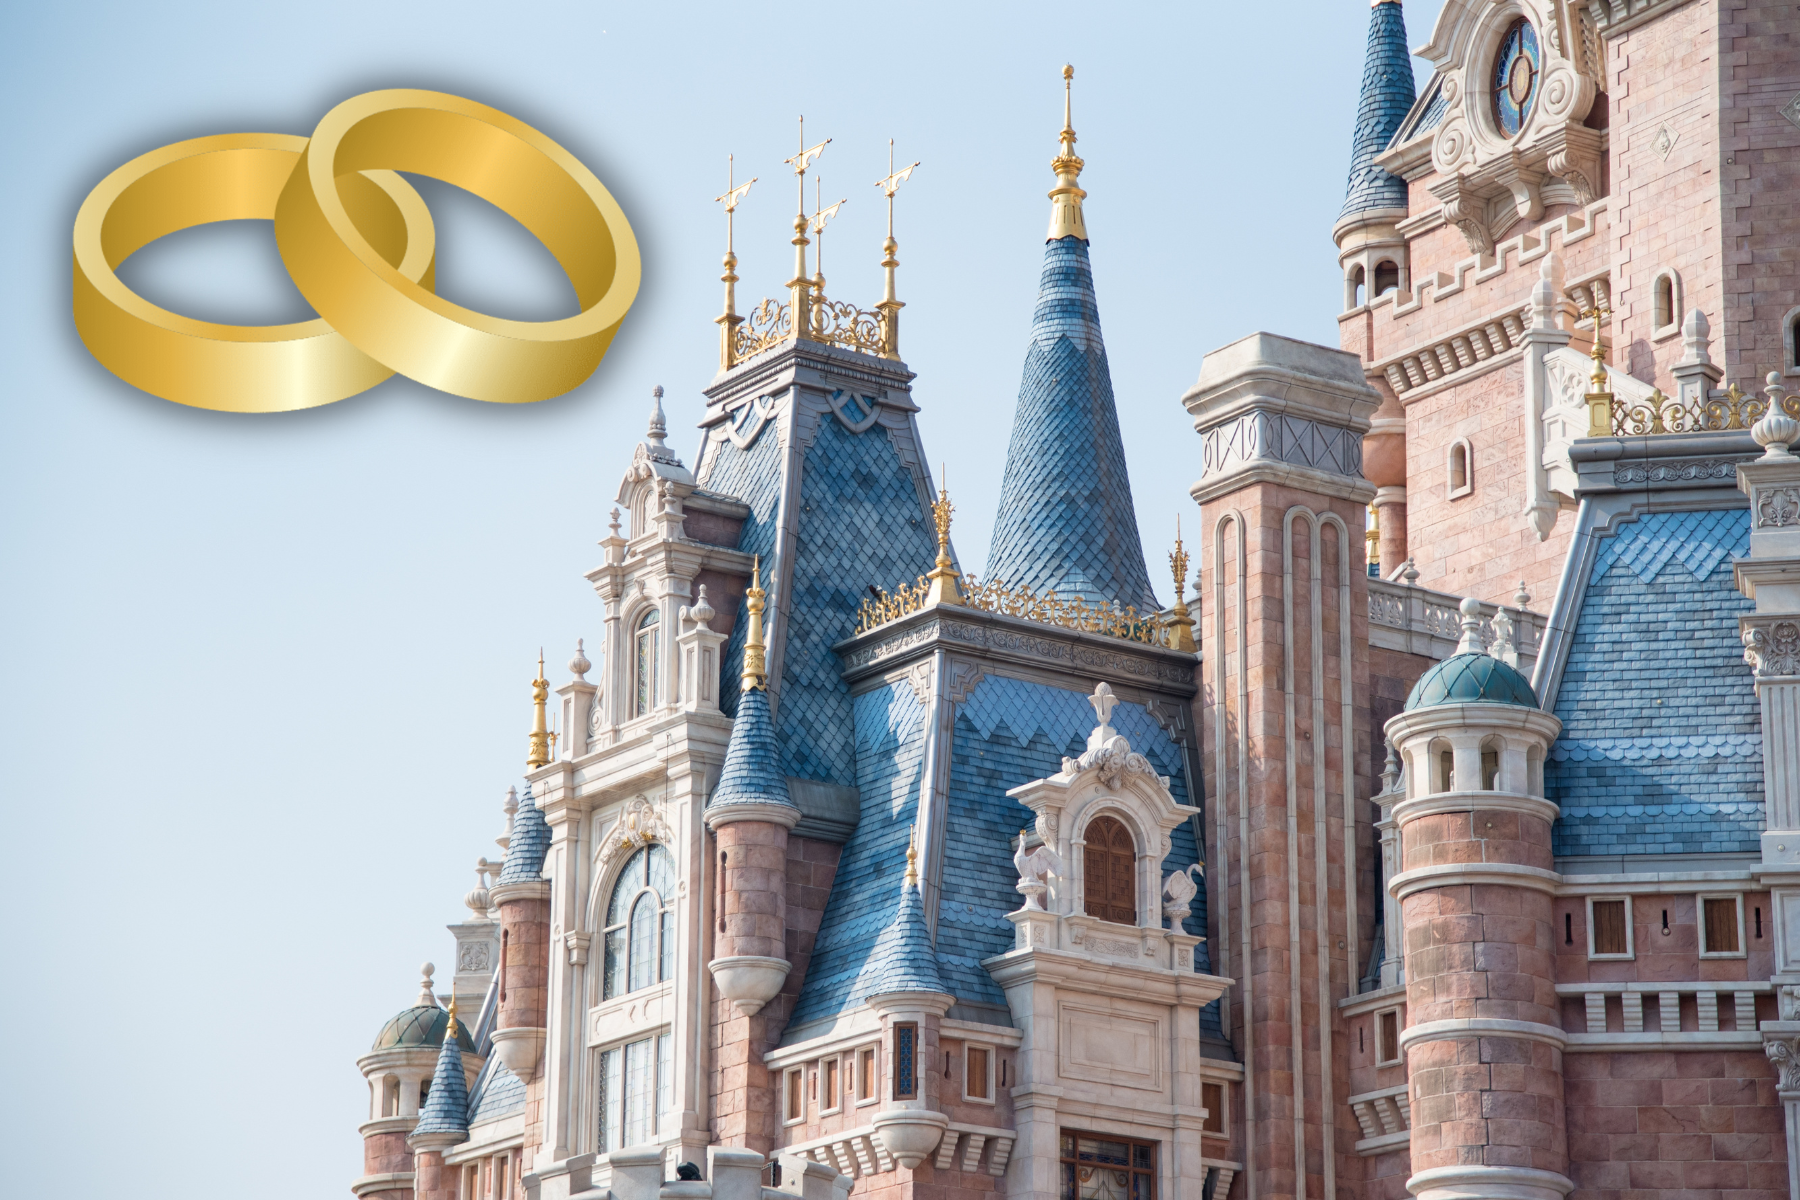 Tie The Knot With Disney Princess Engagement Rings